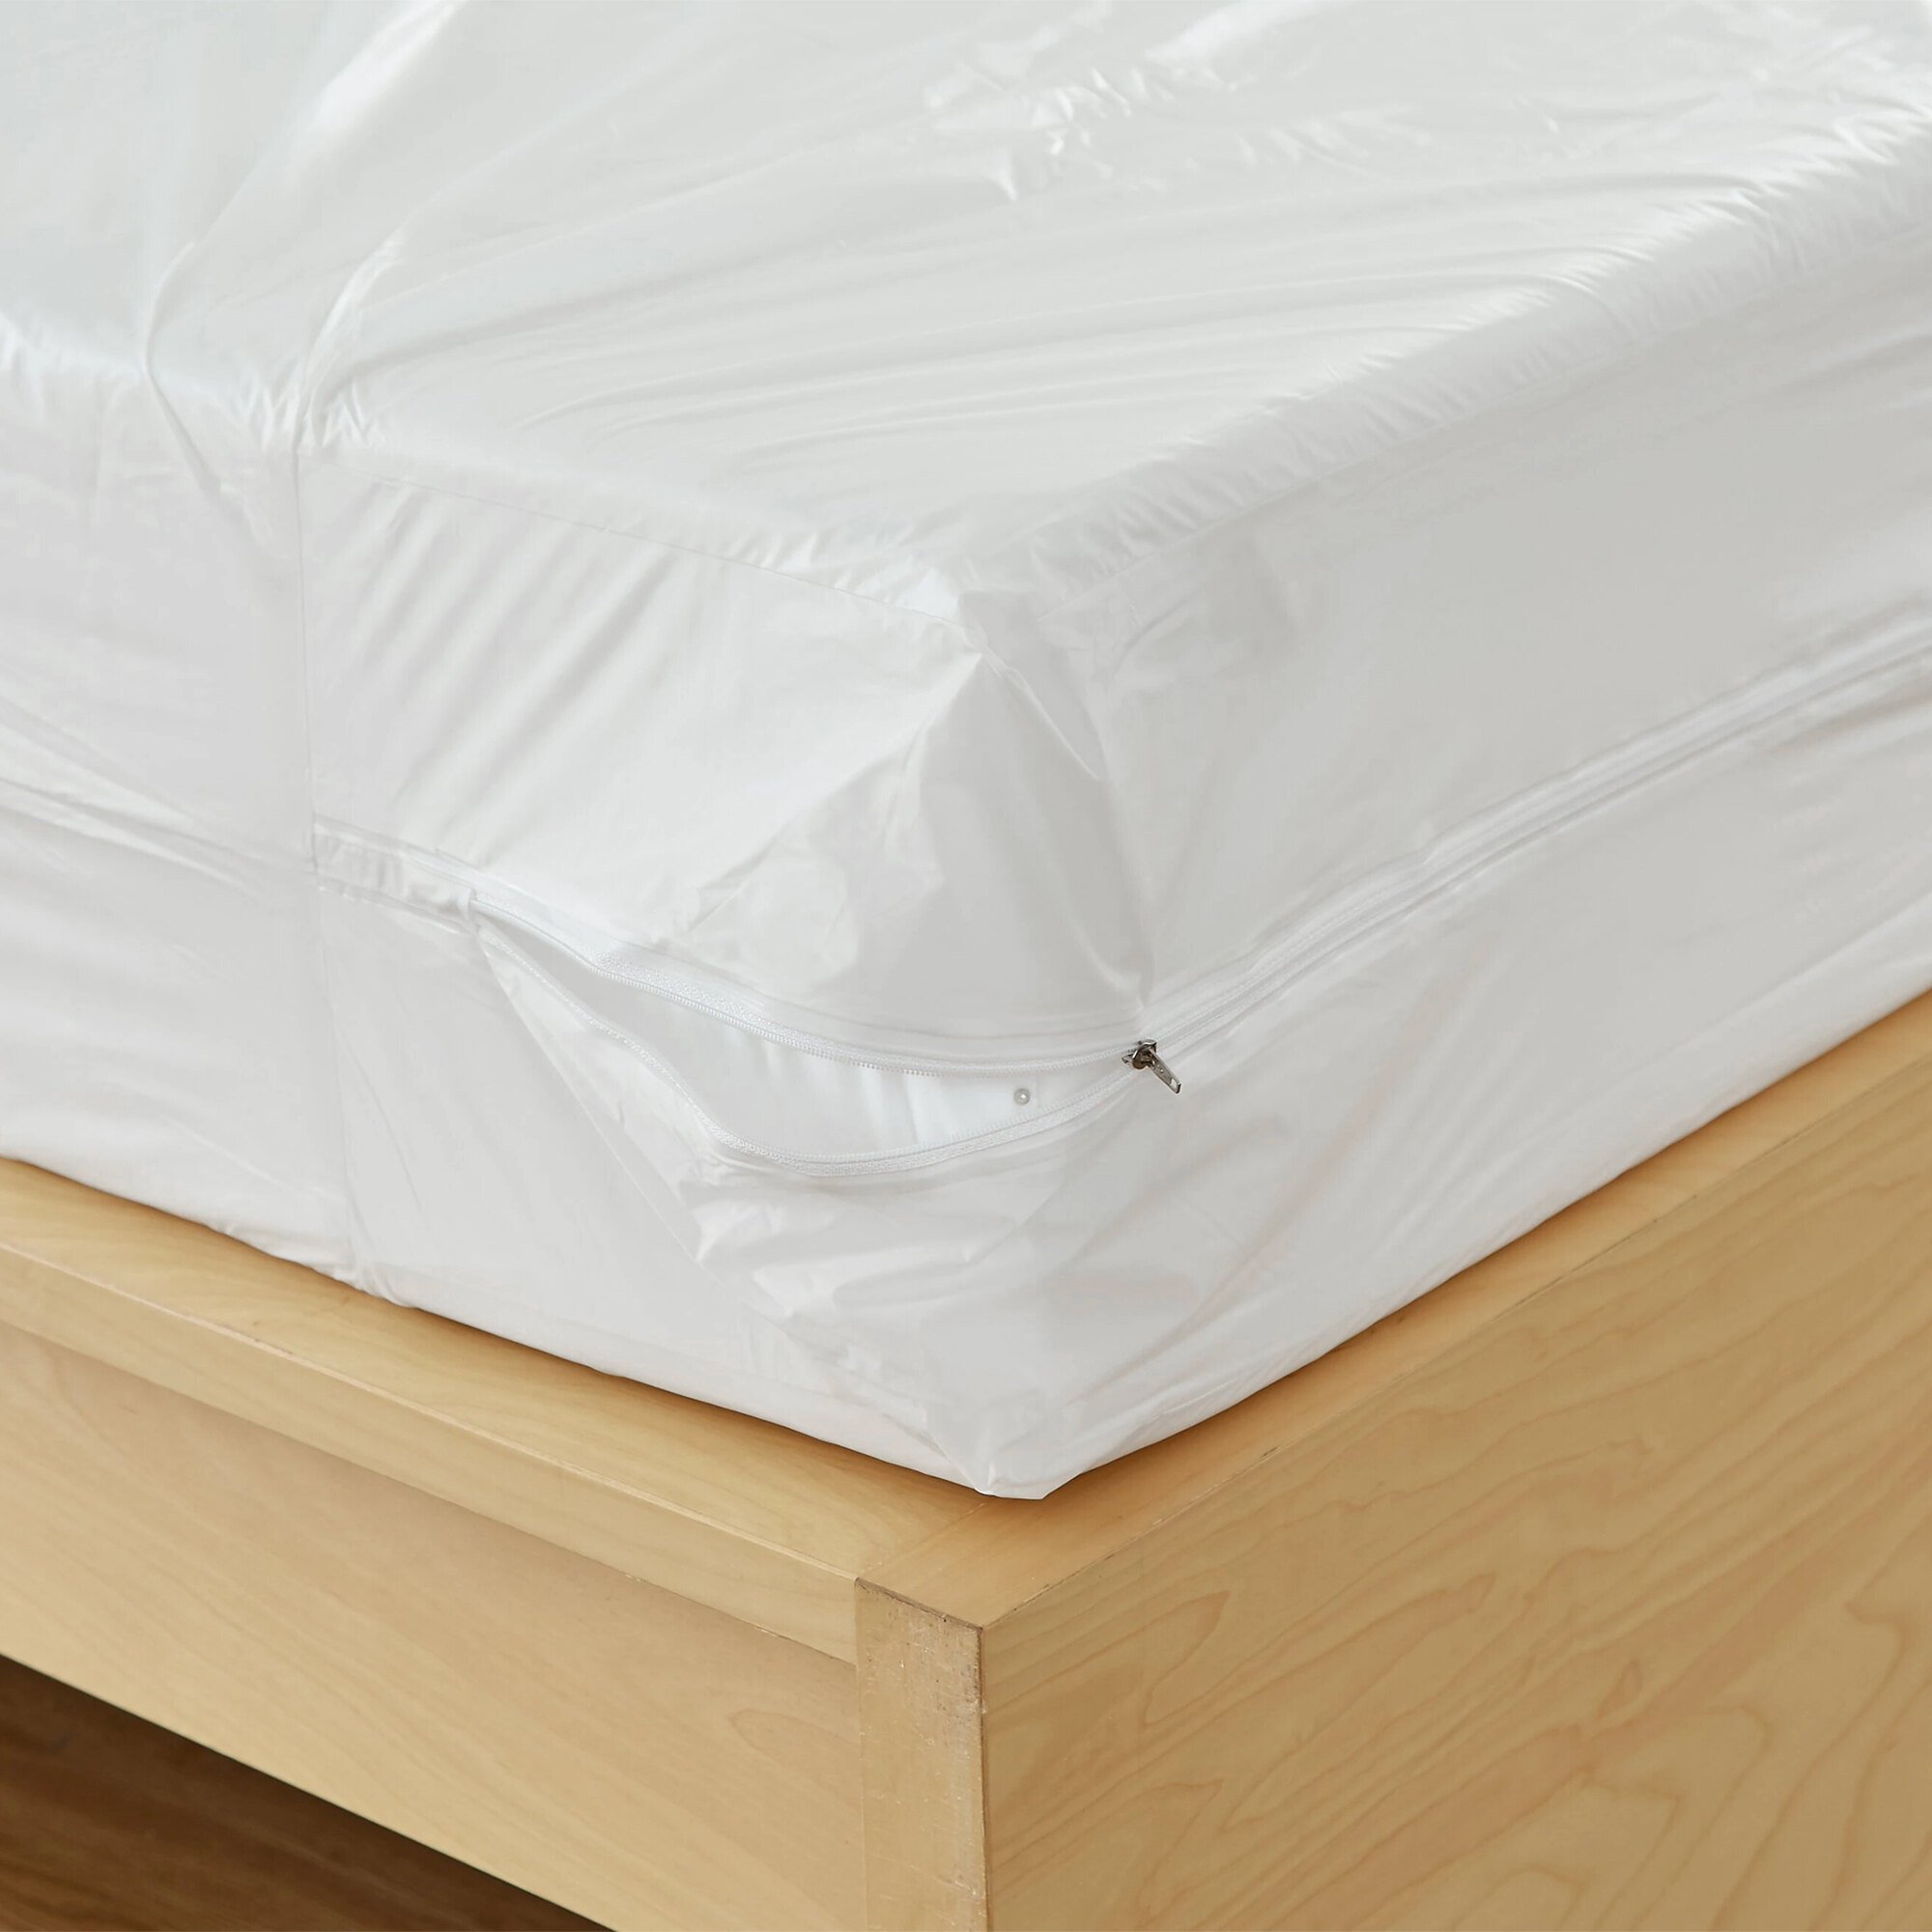 plastic mattress cover bed bugs